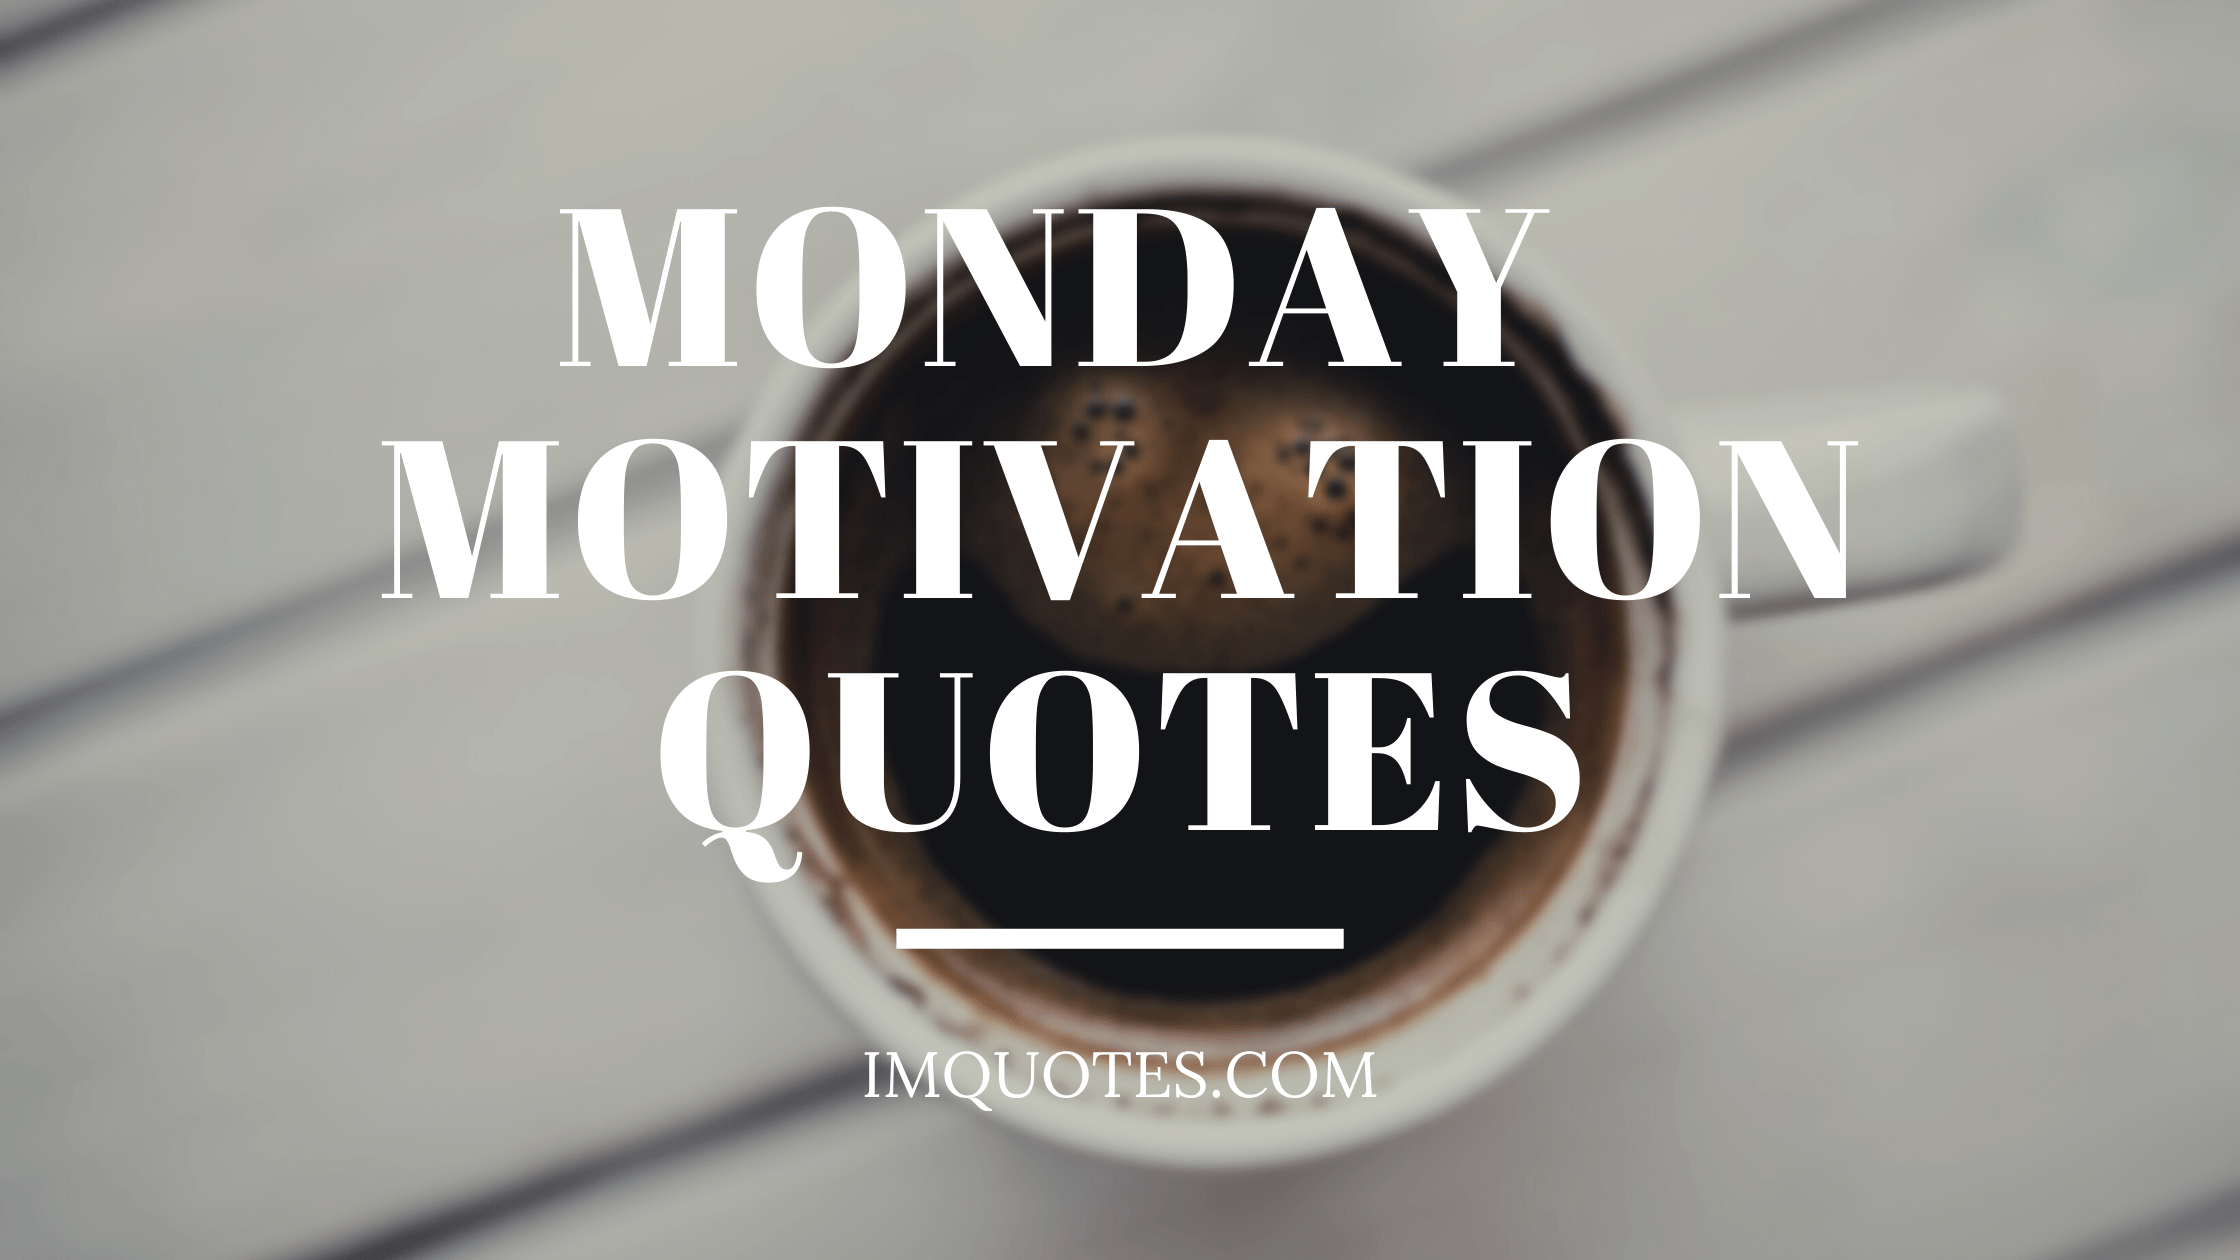 120 Monday Motivation Quotes for Work Inspiration 2022 1